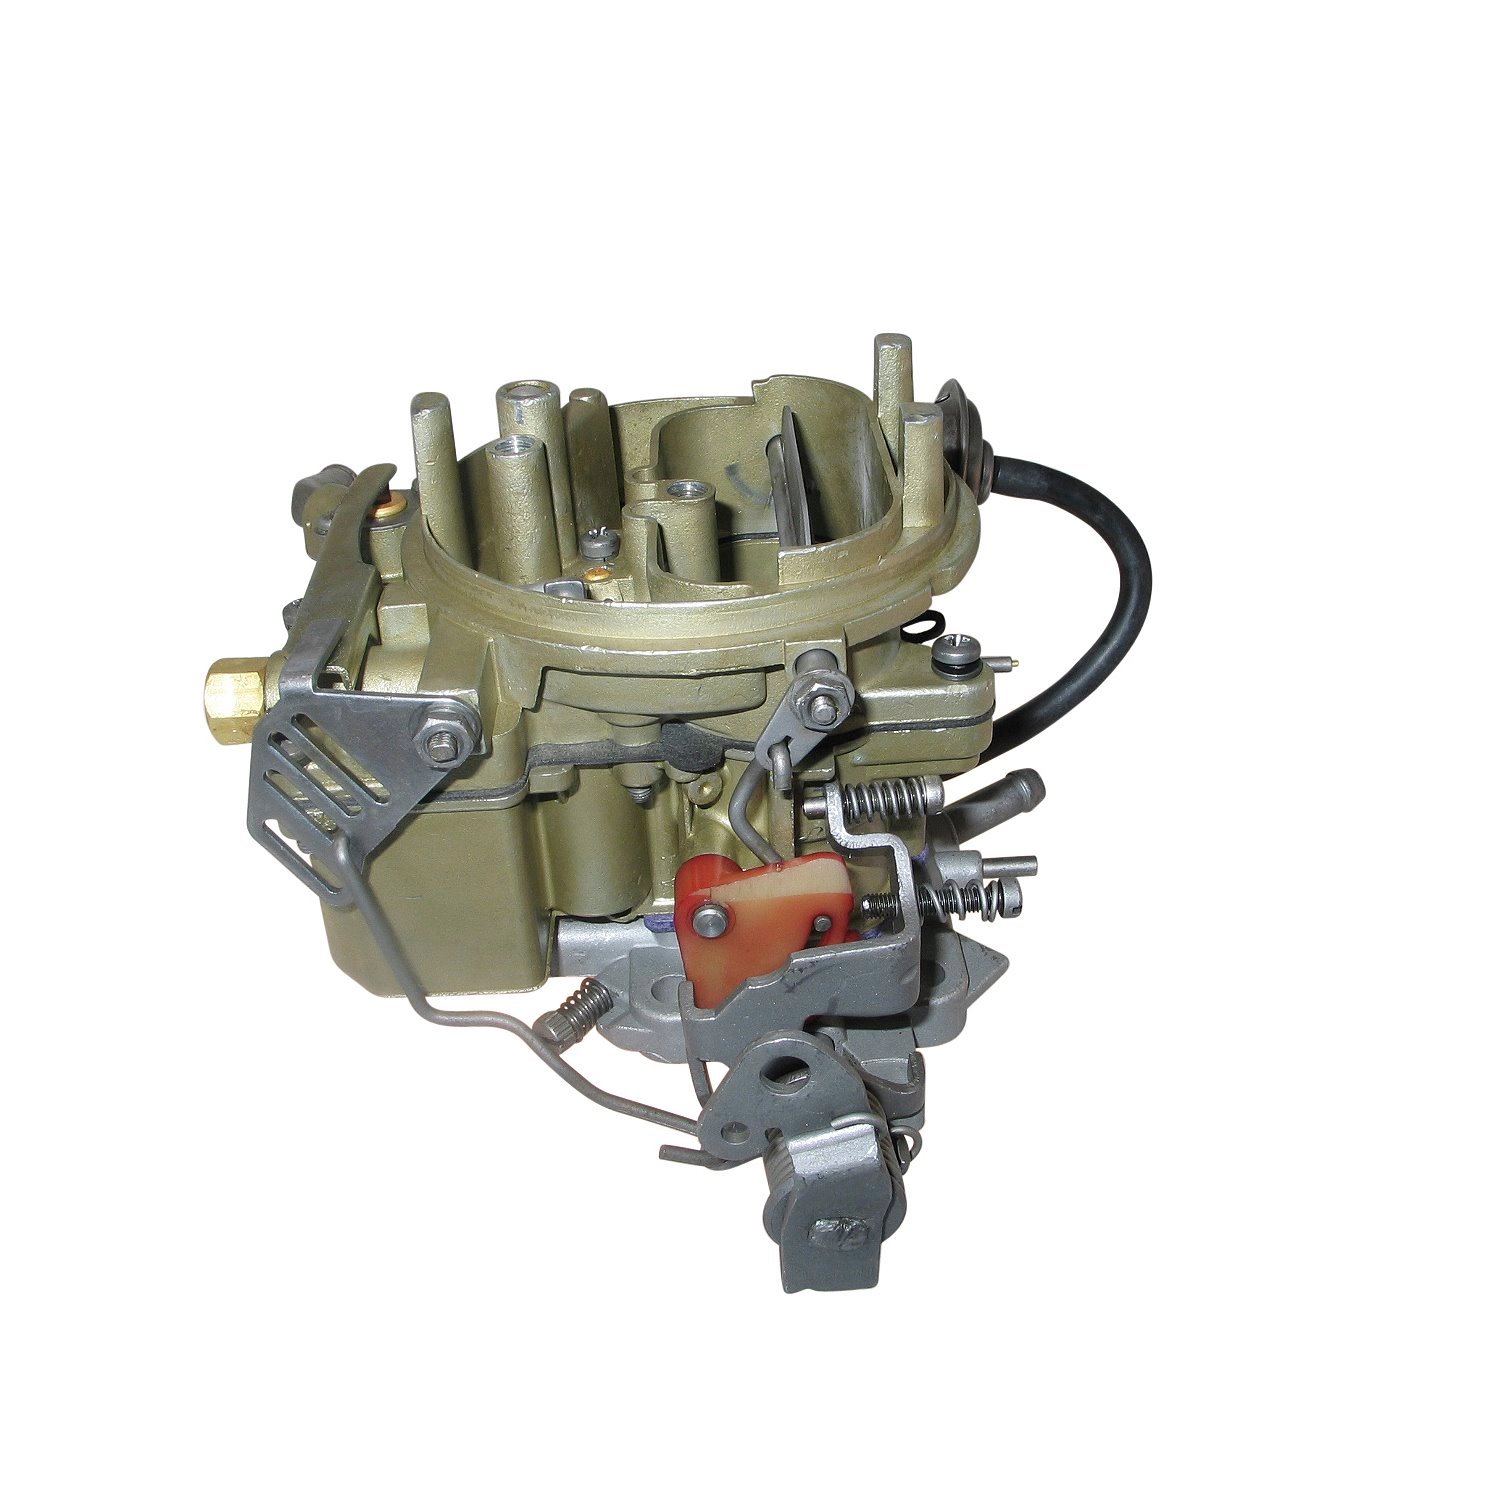 5-5154 Holley Remanufactured Carburetor, 2245-Style